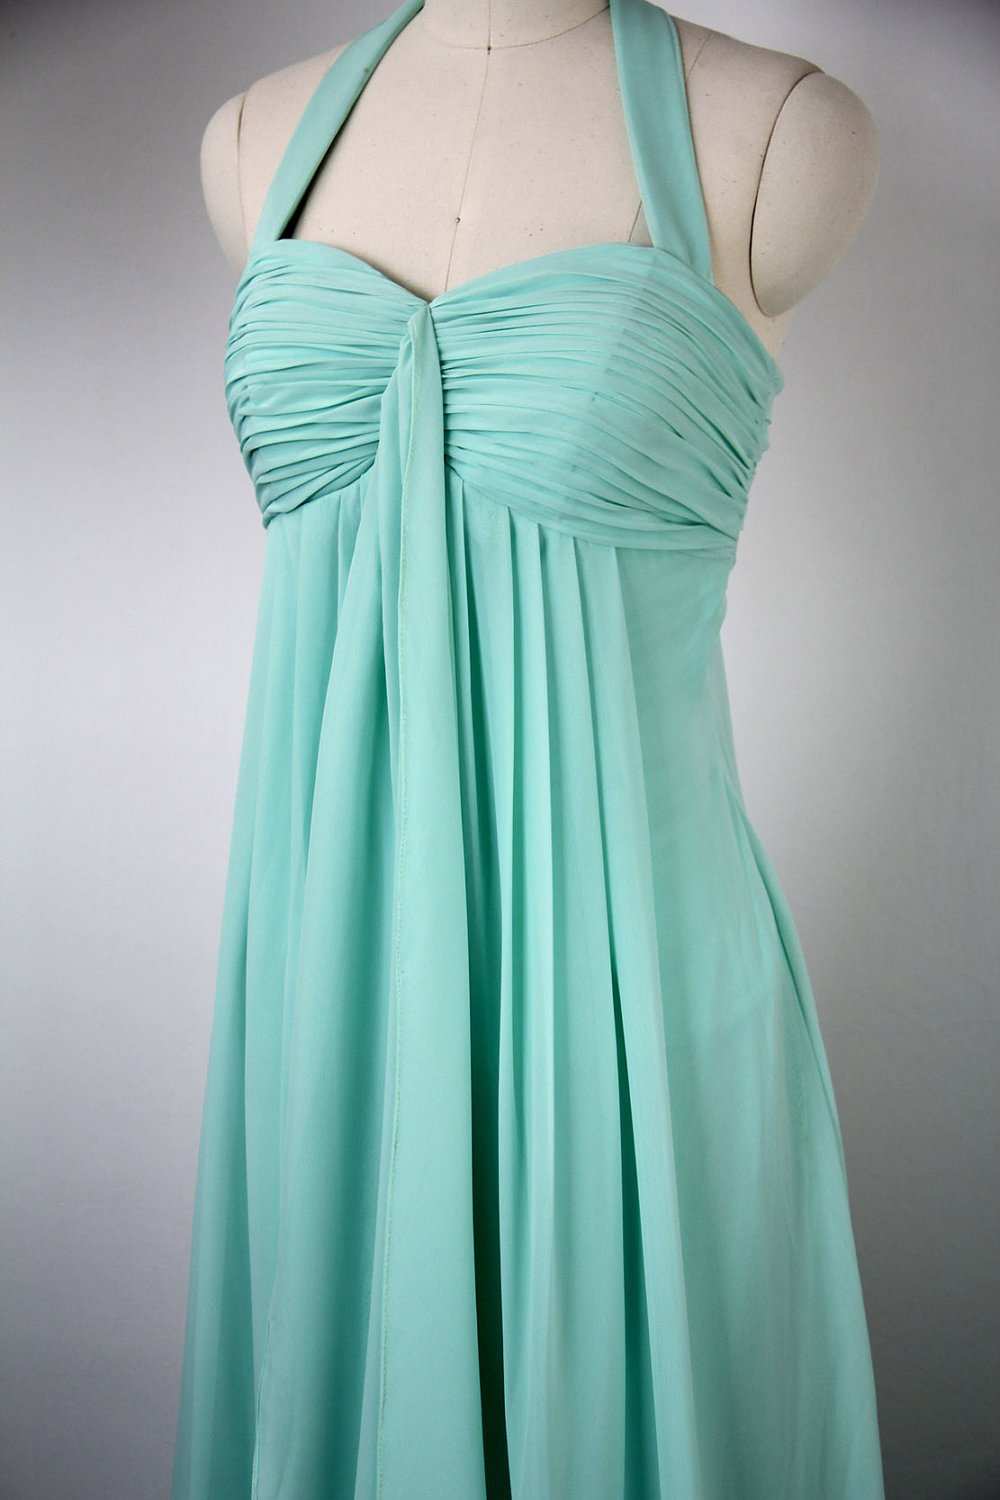 Halter Green Sweetheart Full Length Bridesmaid Dress Prom Party Gown